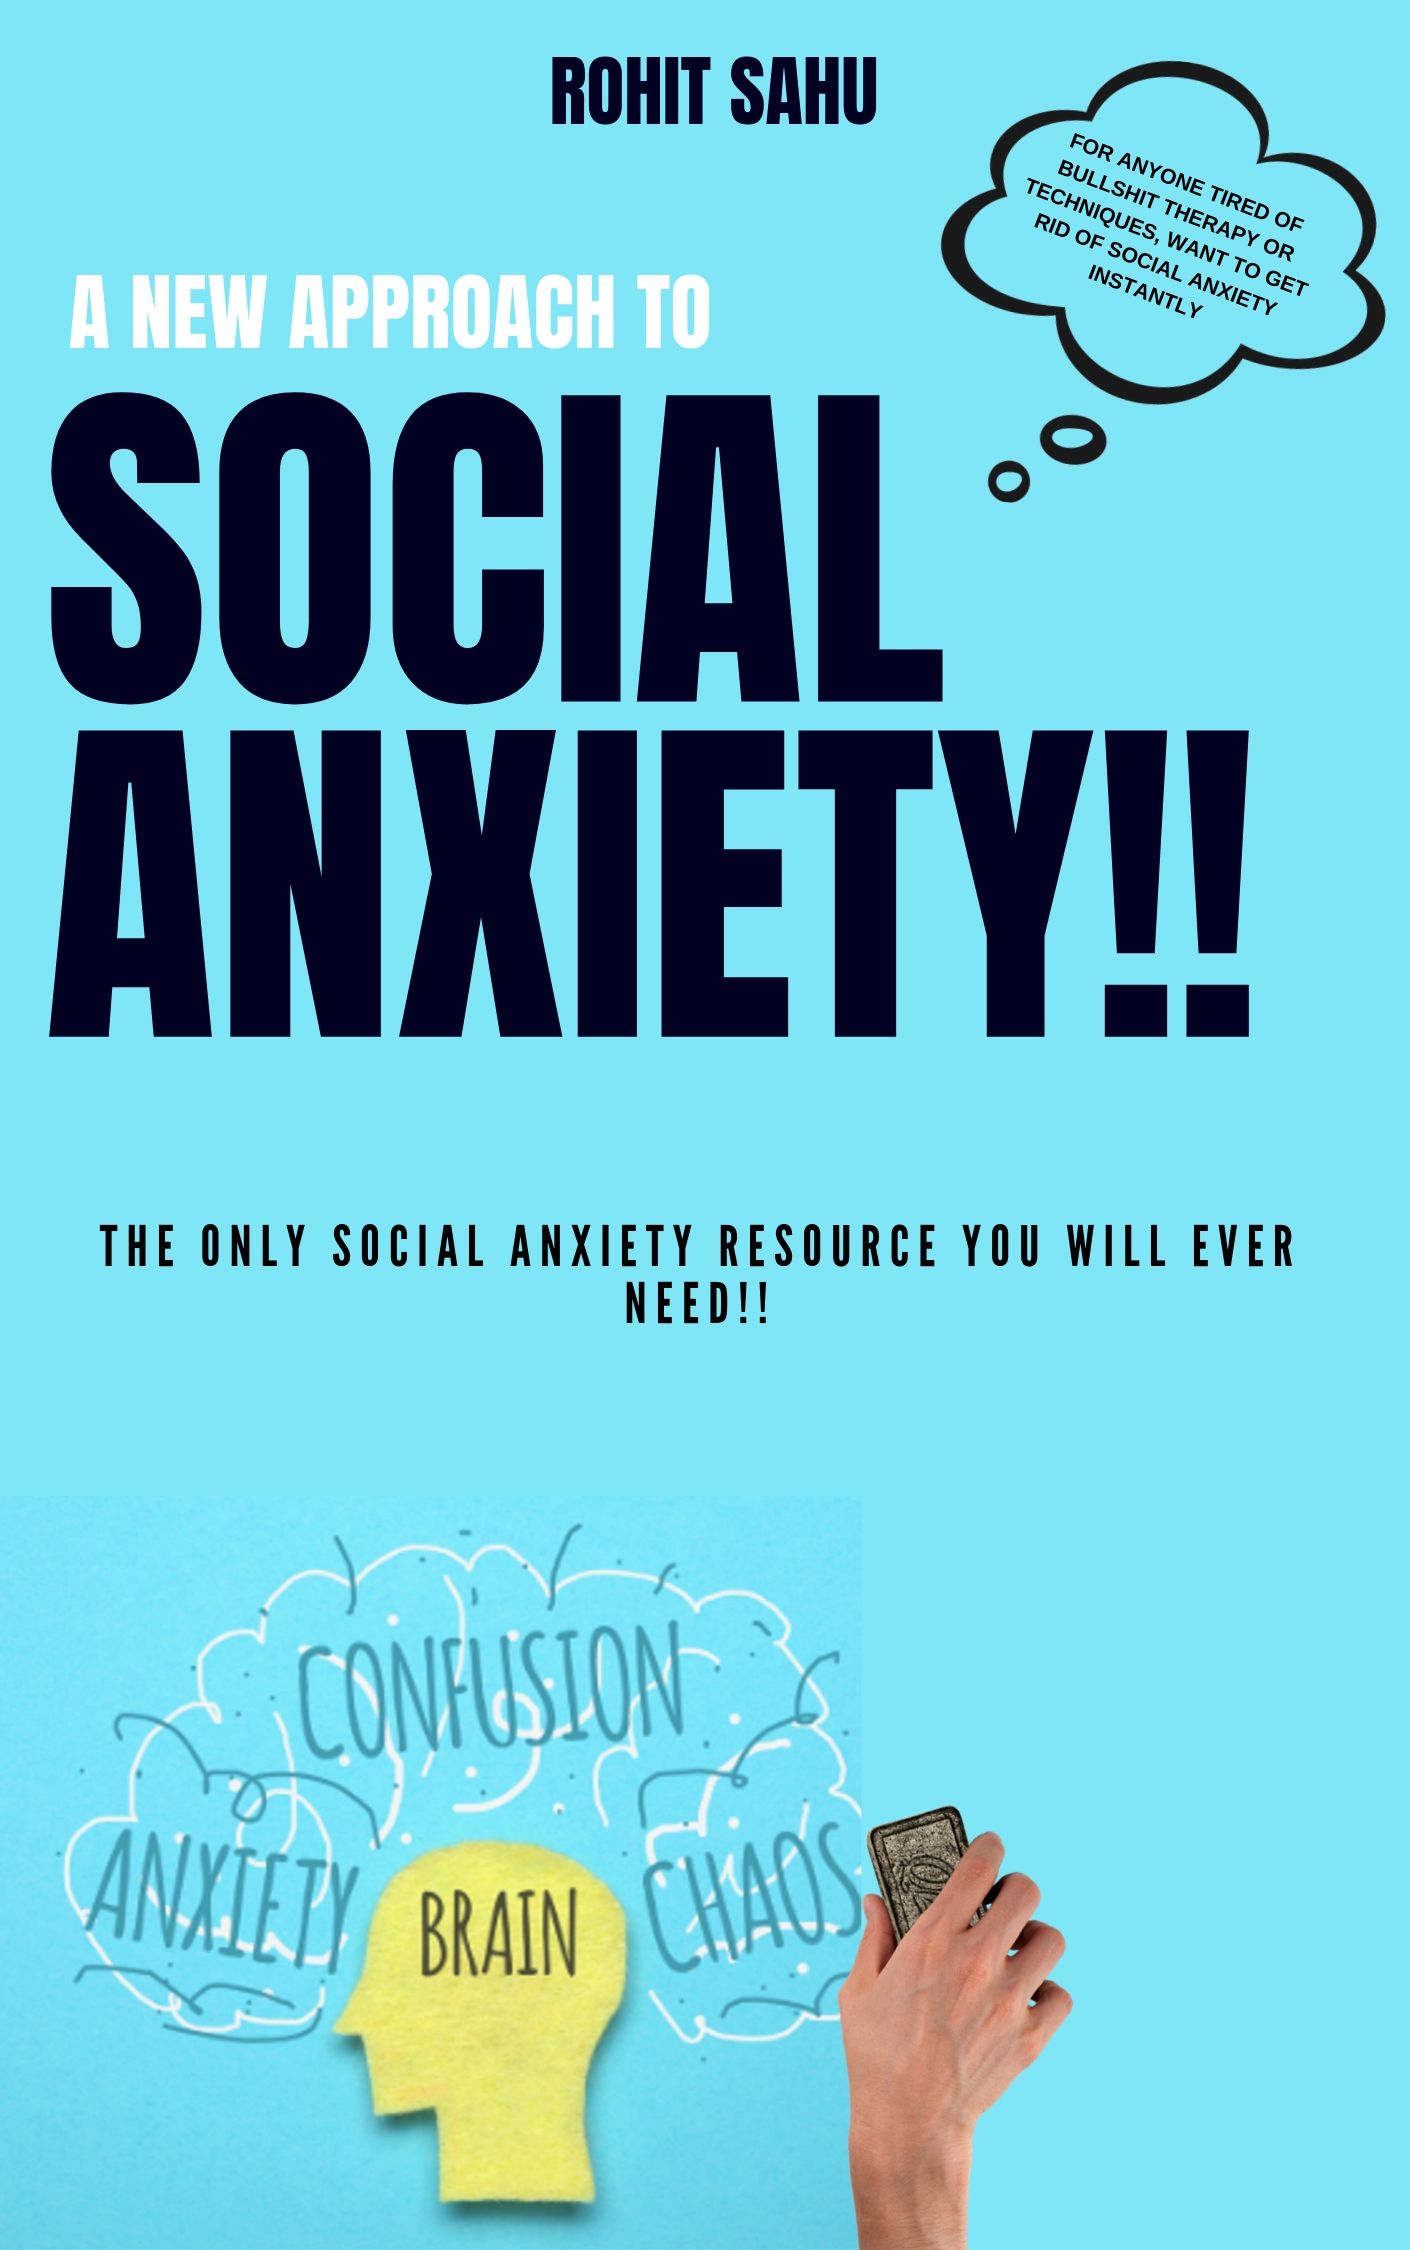 FREE: A NEW APPROACH TO SOCIAL ANXIETY!! by Rohit Sahu